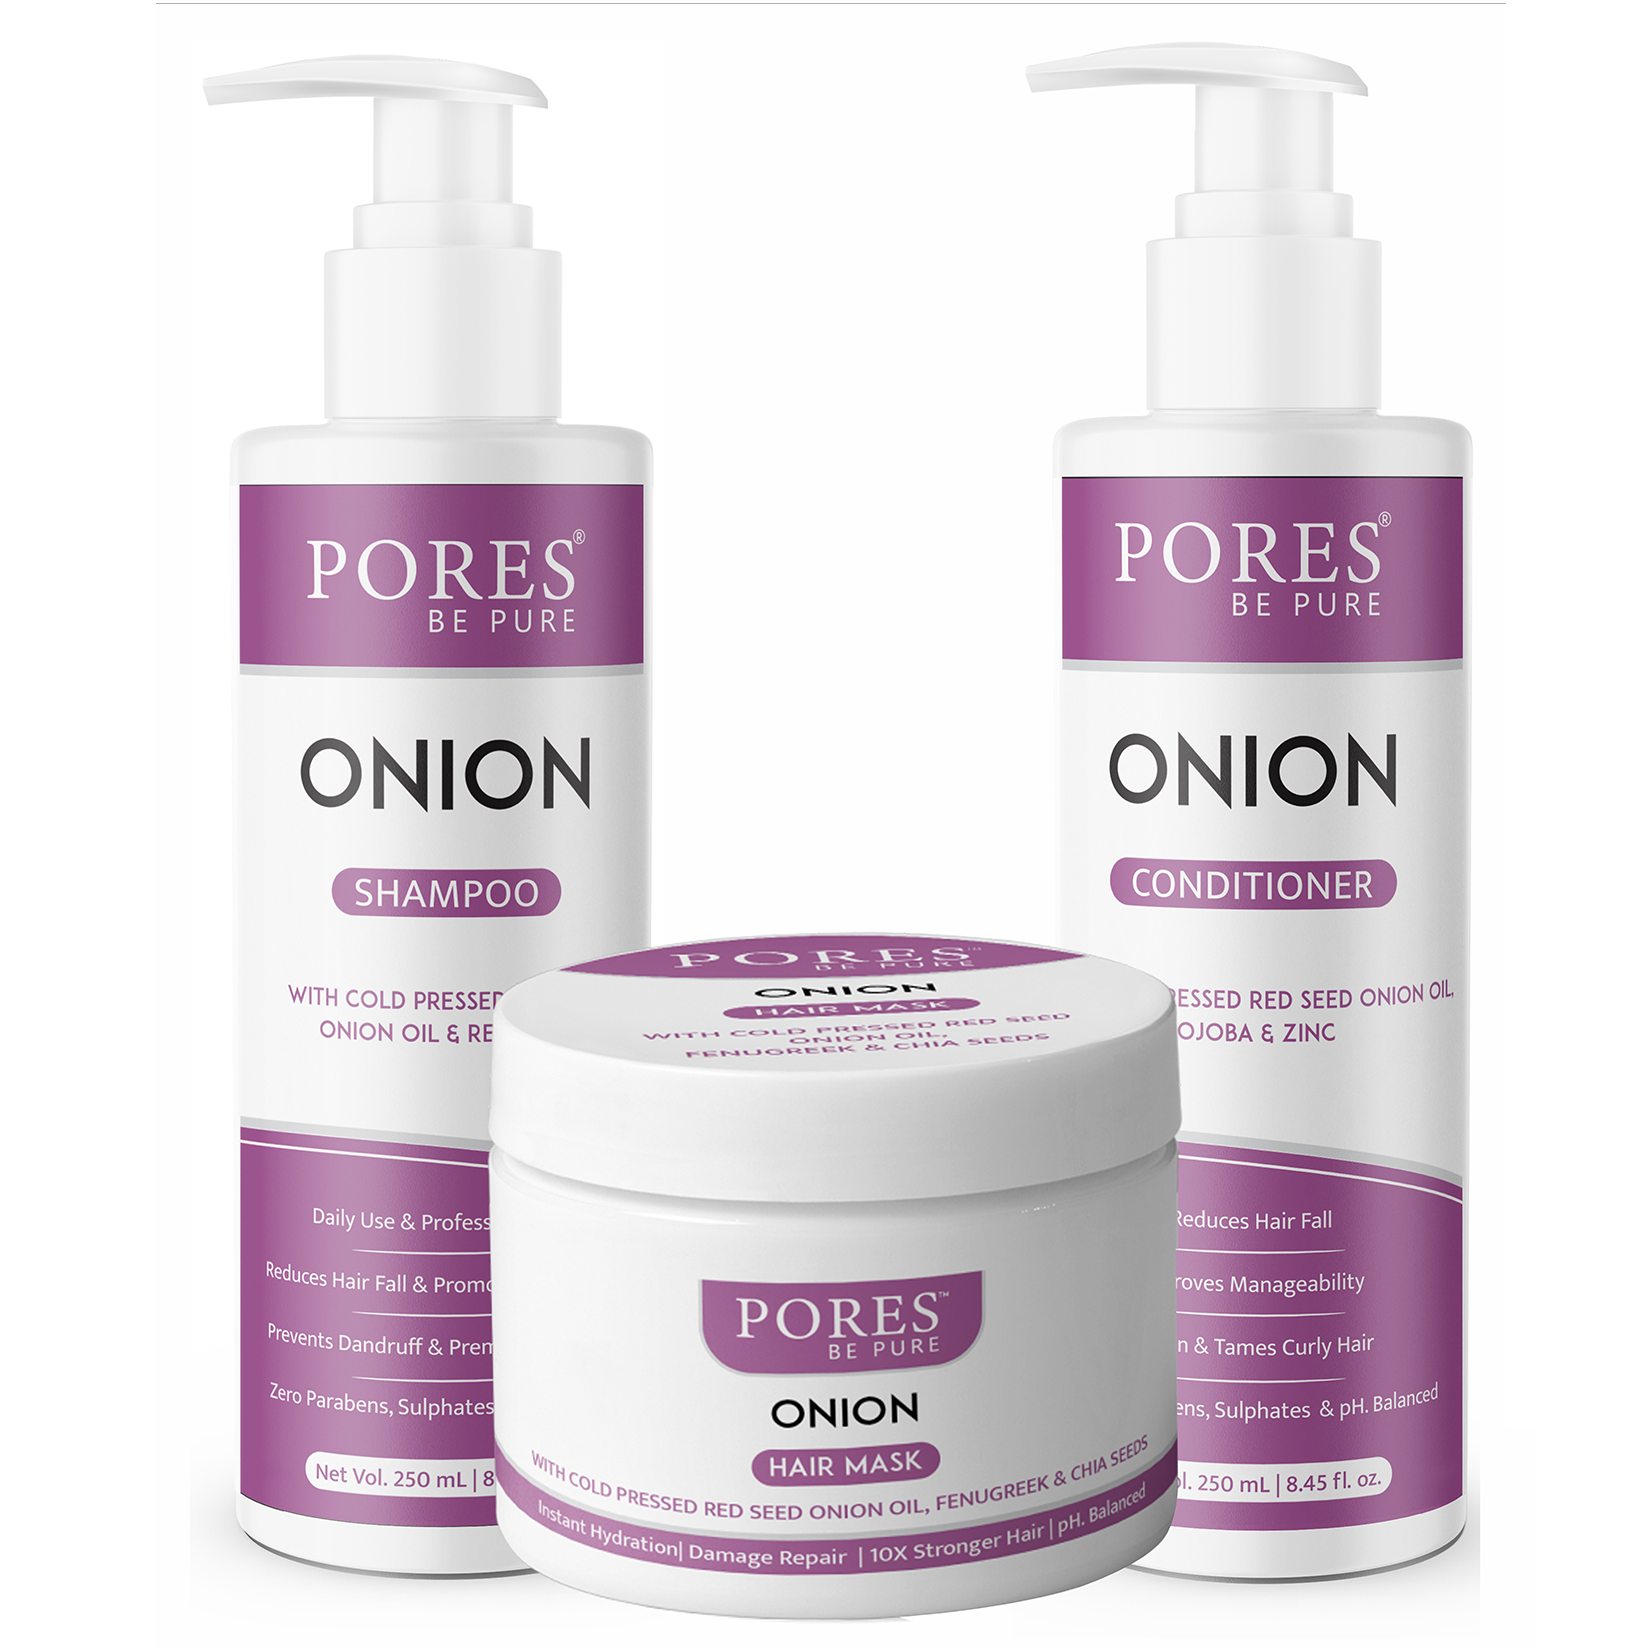 Onion Shampoo with Conditioner and Hair Mask by PORES BE PURE